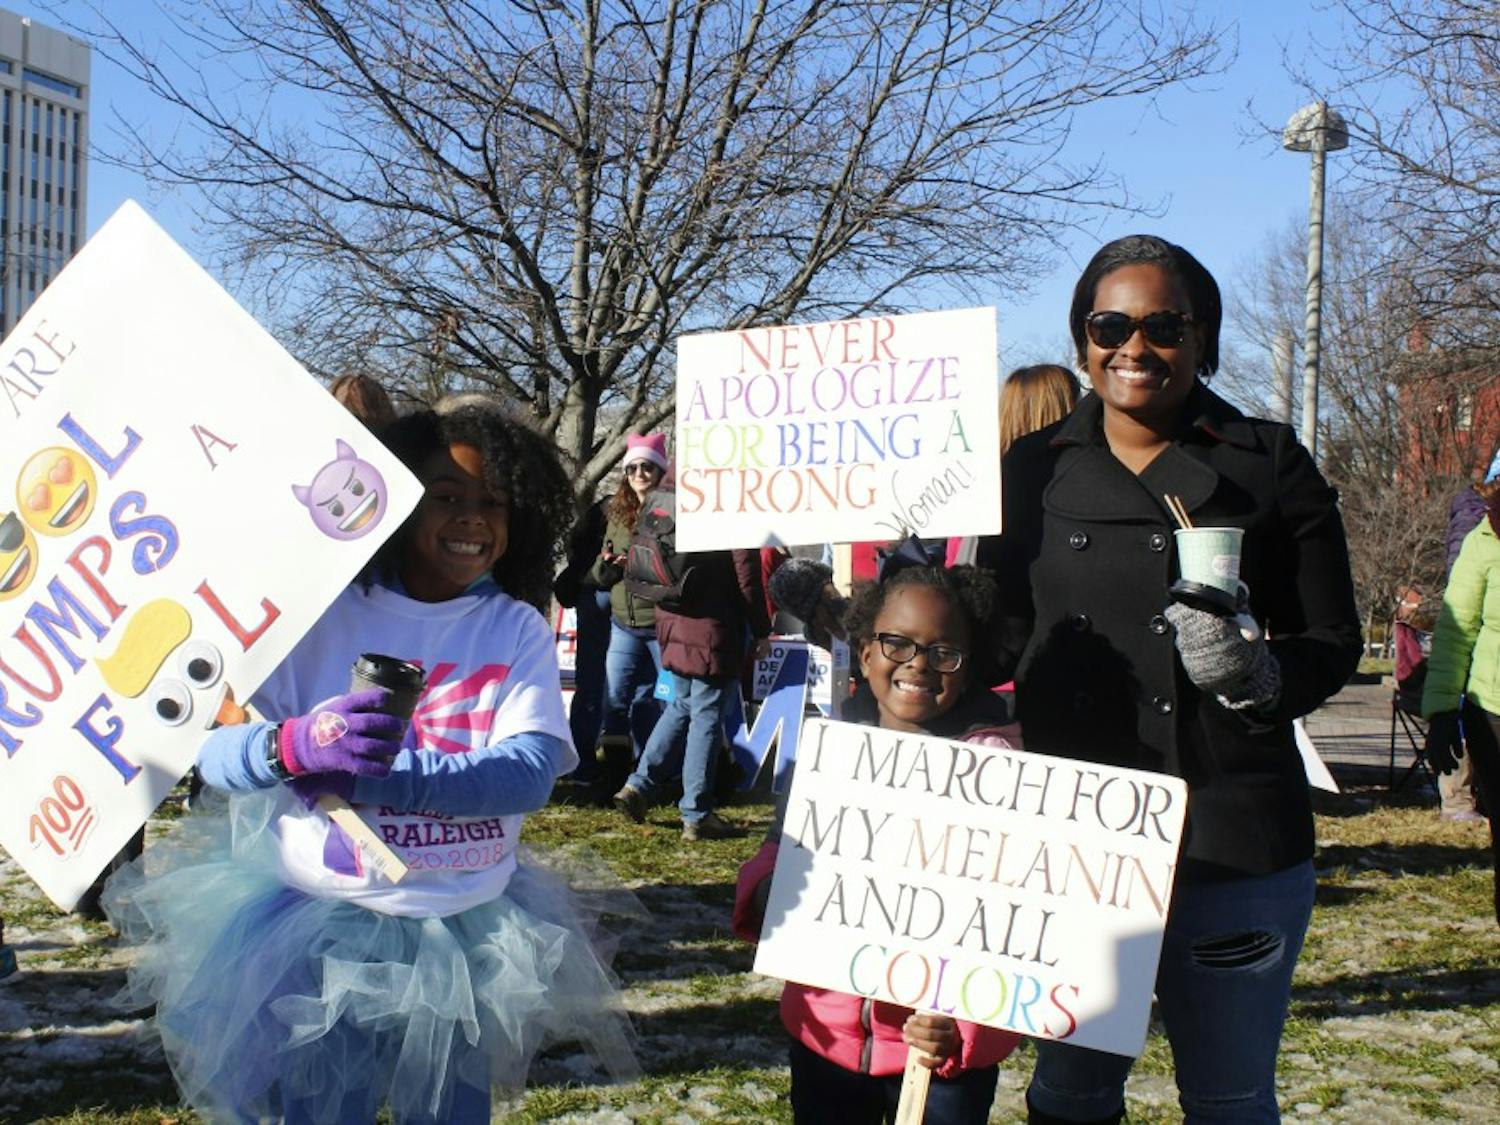 (From left) Kayla Dunson, Cheyloh Scott, and Jennifer Grayson from Fayettville, N.C. attended Saturday's march.